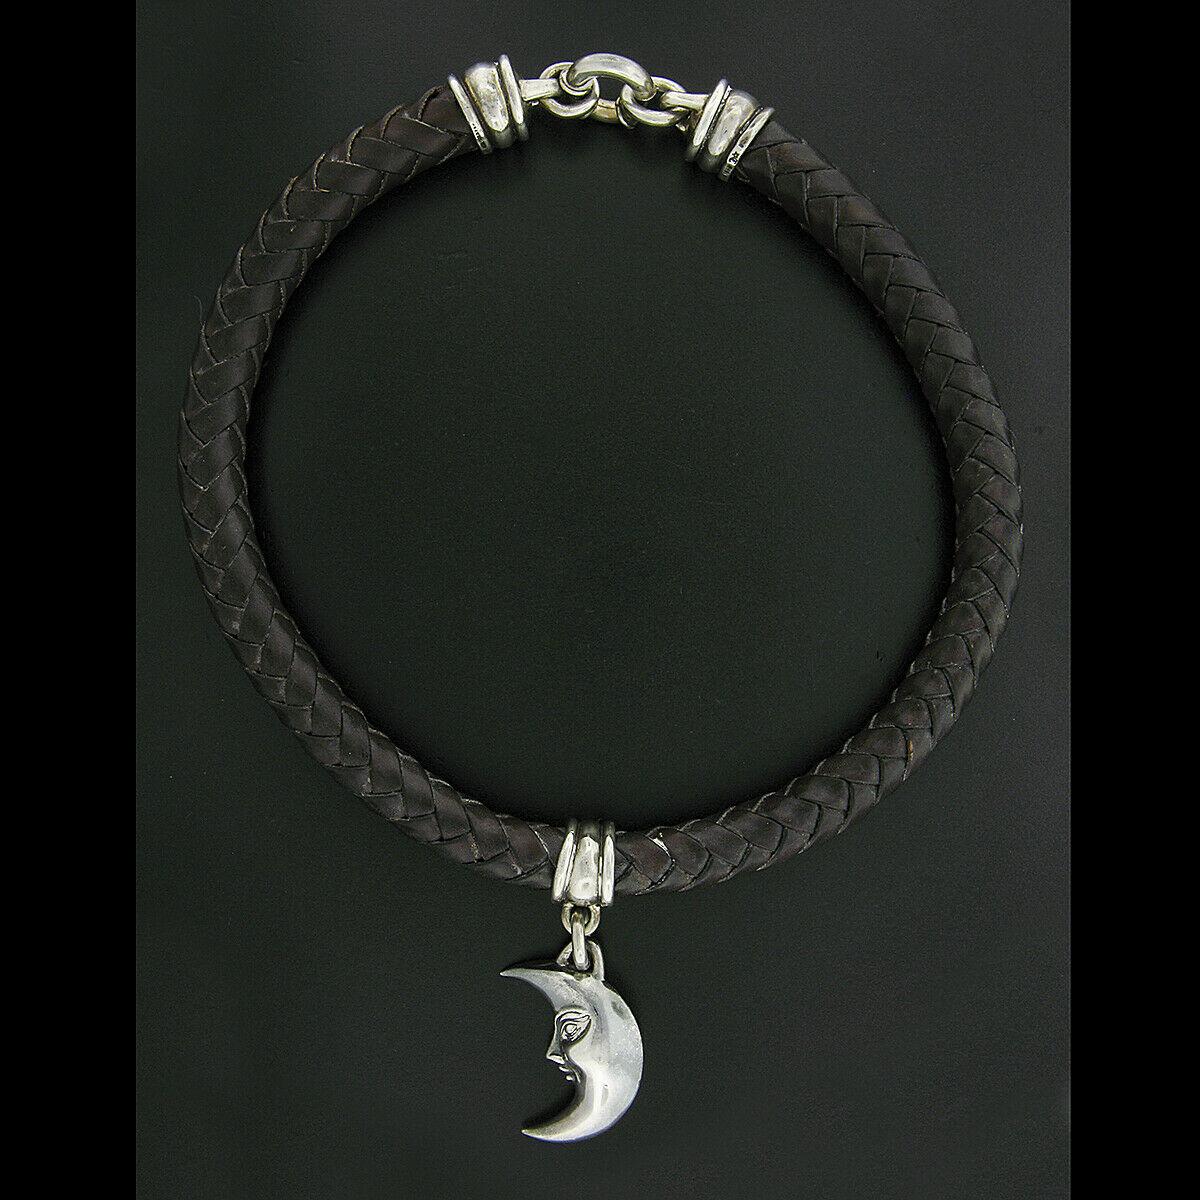 1996 B. Kieselstein-Cord Silver Man in the Moon Pendant Braided Leather Necklace For Sale 1